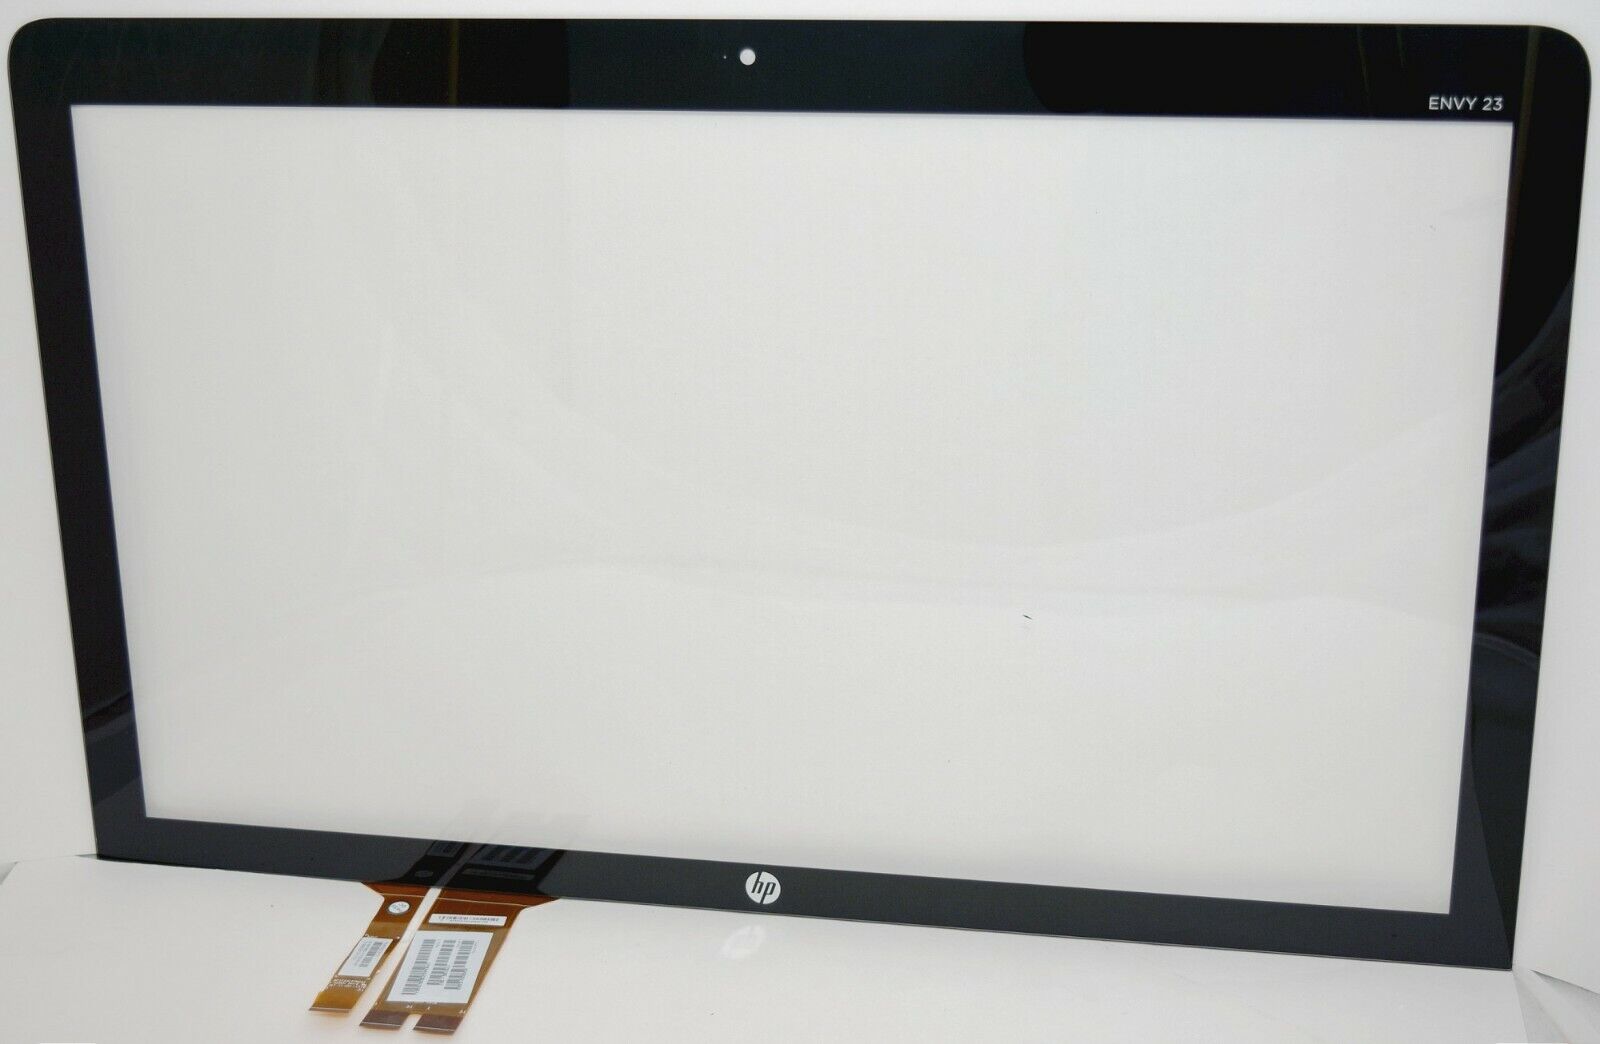 NEW Original HP ENVY23 Touch Screen Digitizer Glass for LCD cd 553gt3 envy 23 